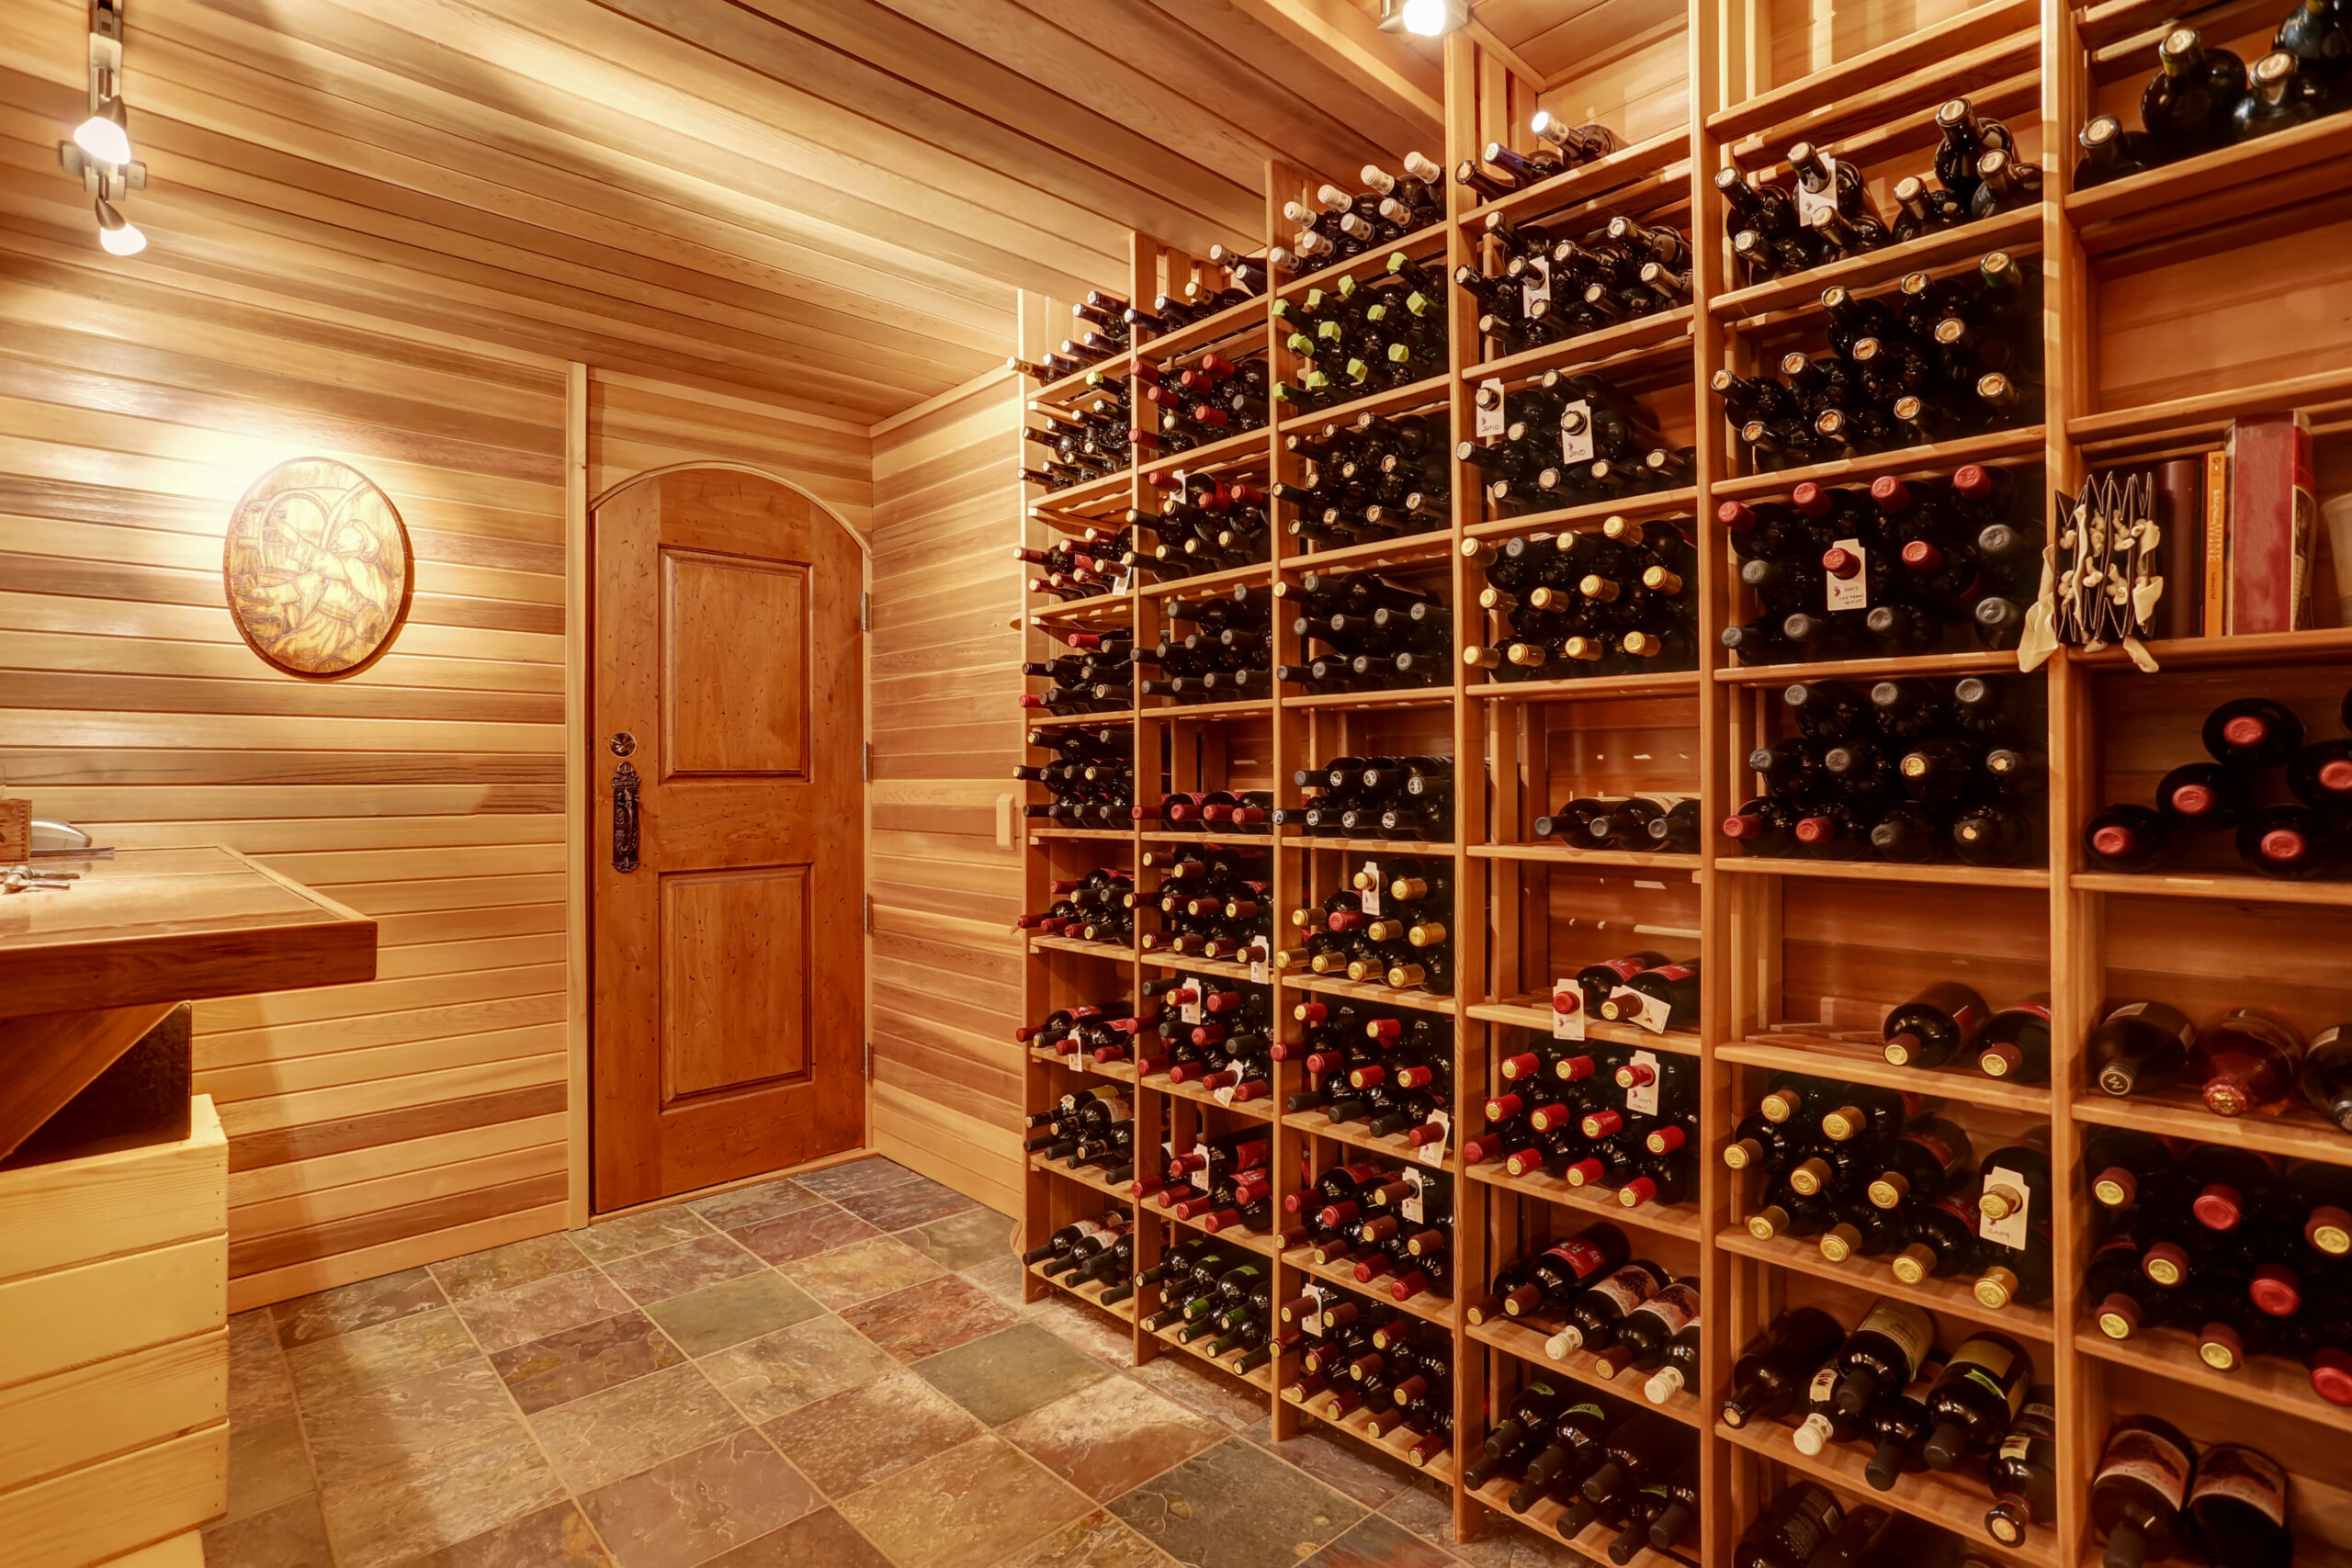 How Can I Keep My Wine Cellar Cool?